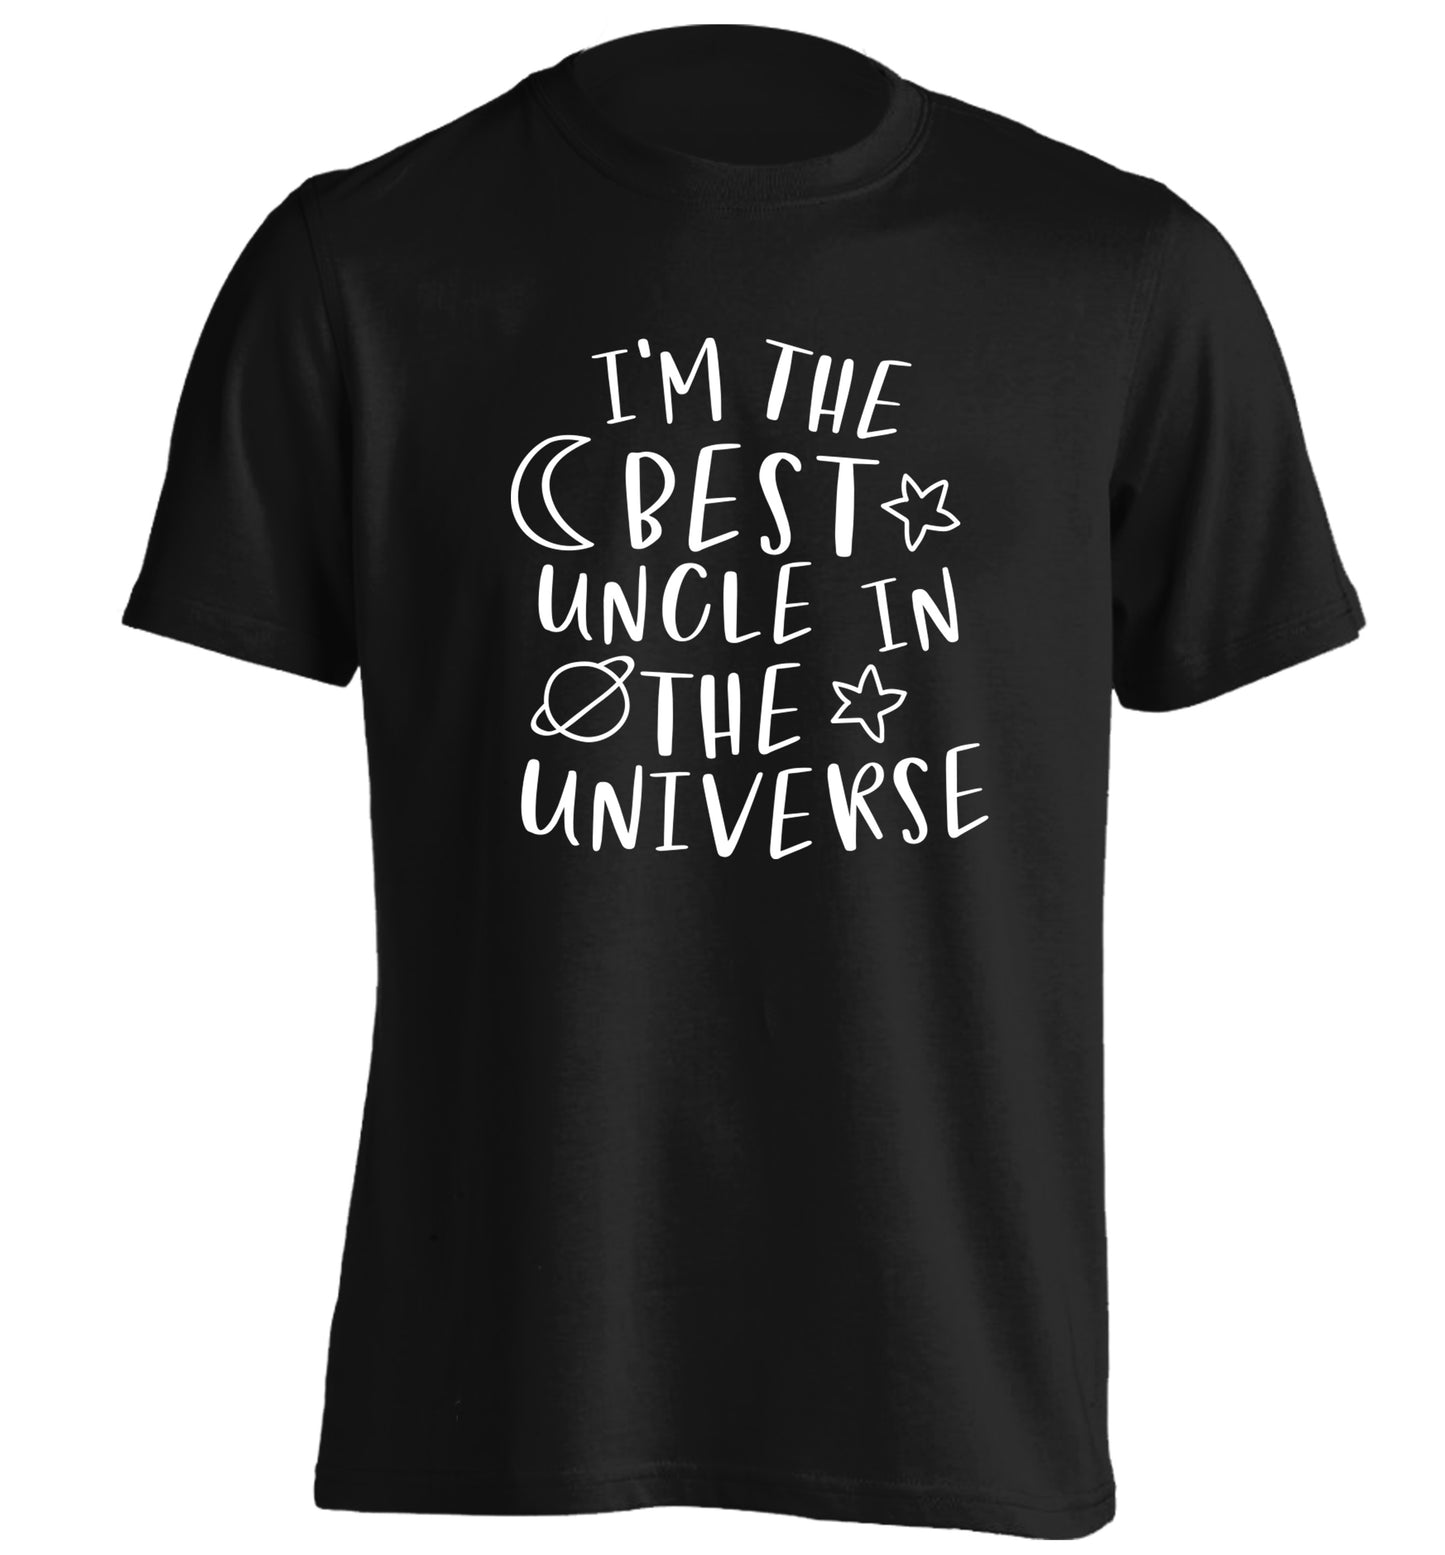 I'm the best uncle in the universe adults unisex black Tshirt 2XL